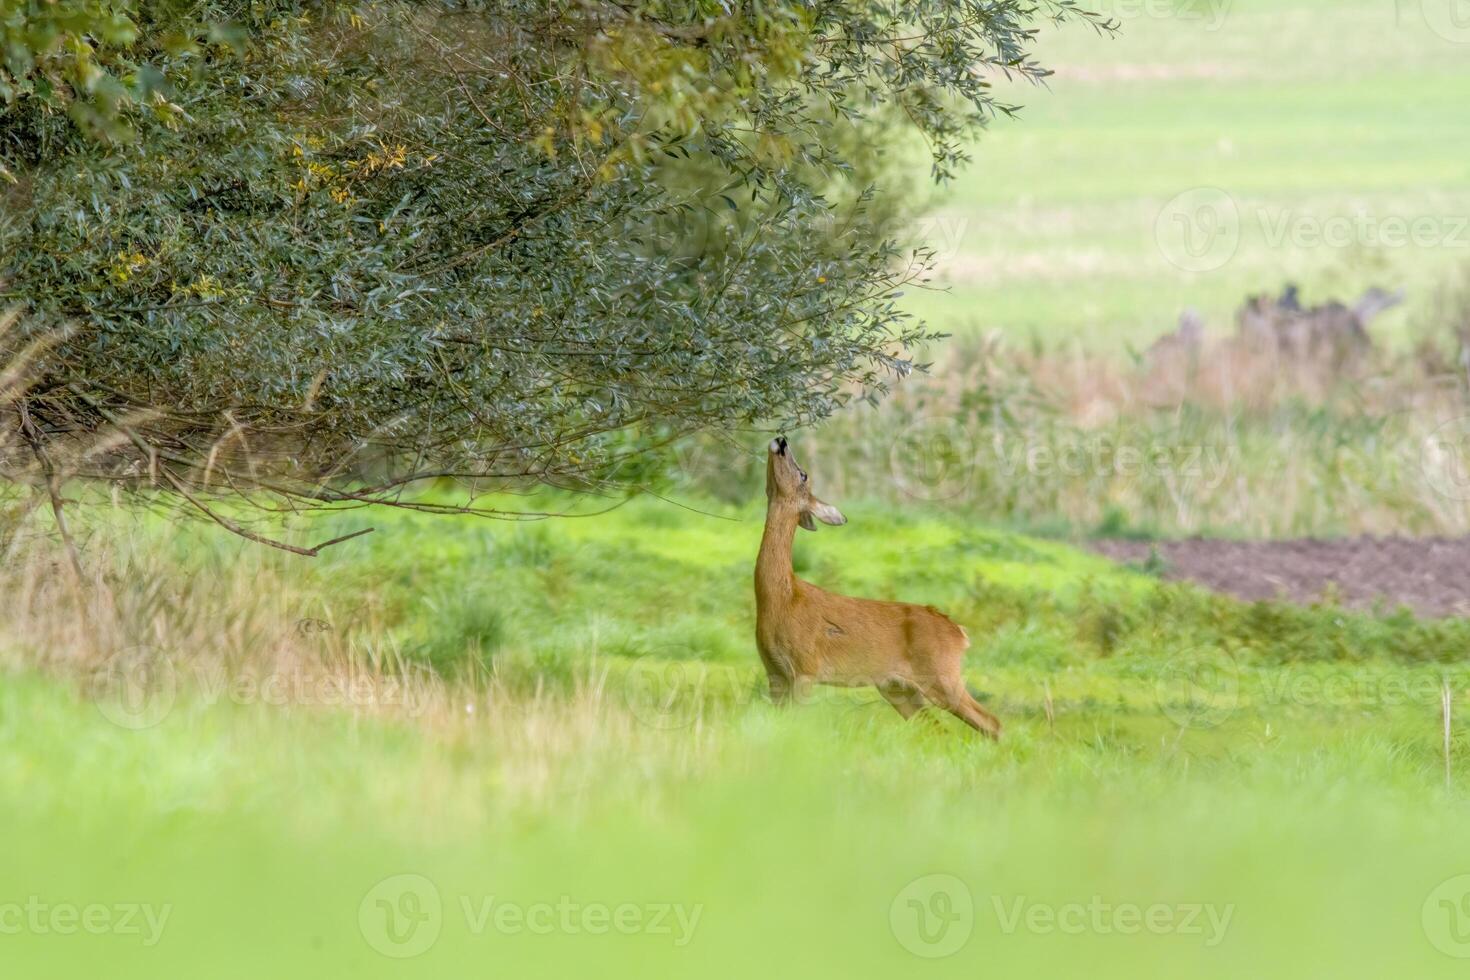 Deer grazing and relaxing in nature photo